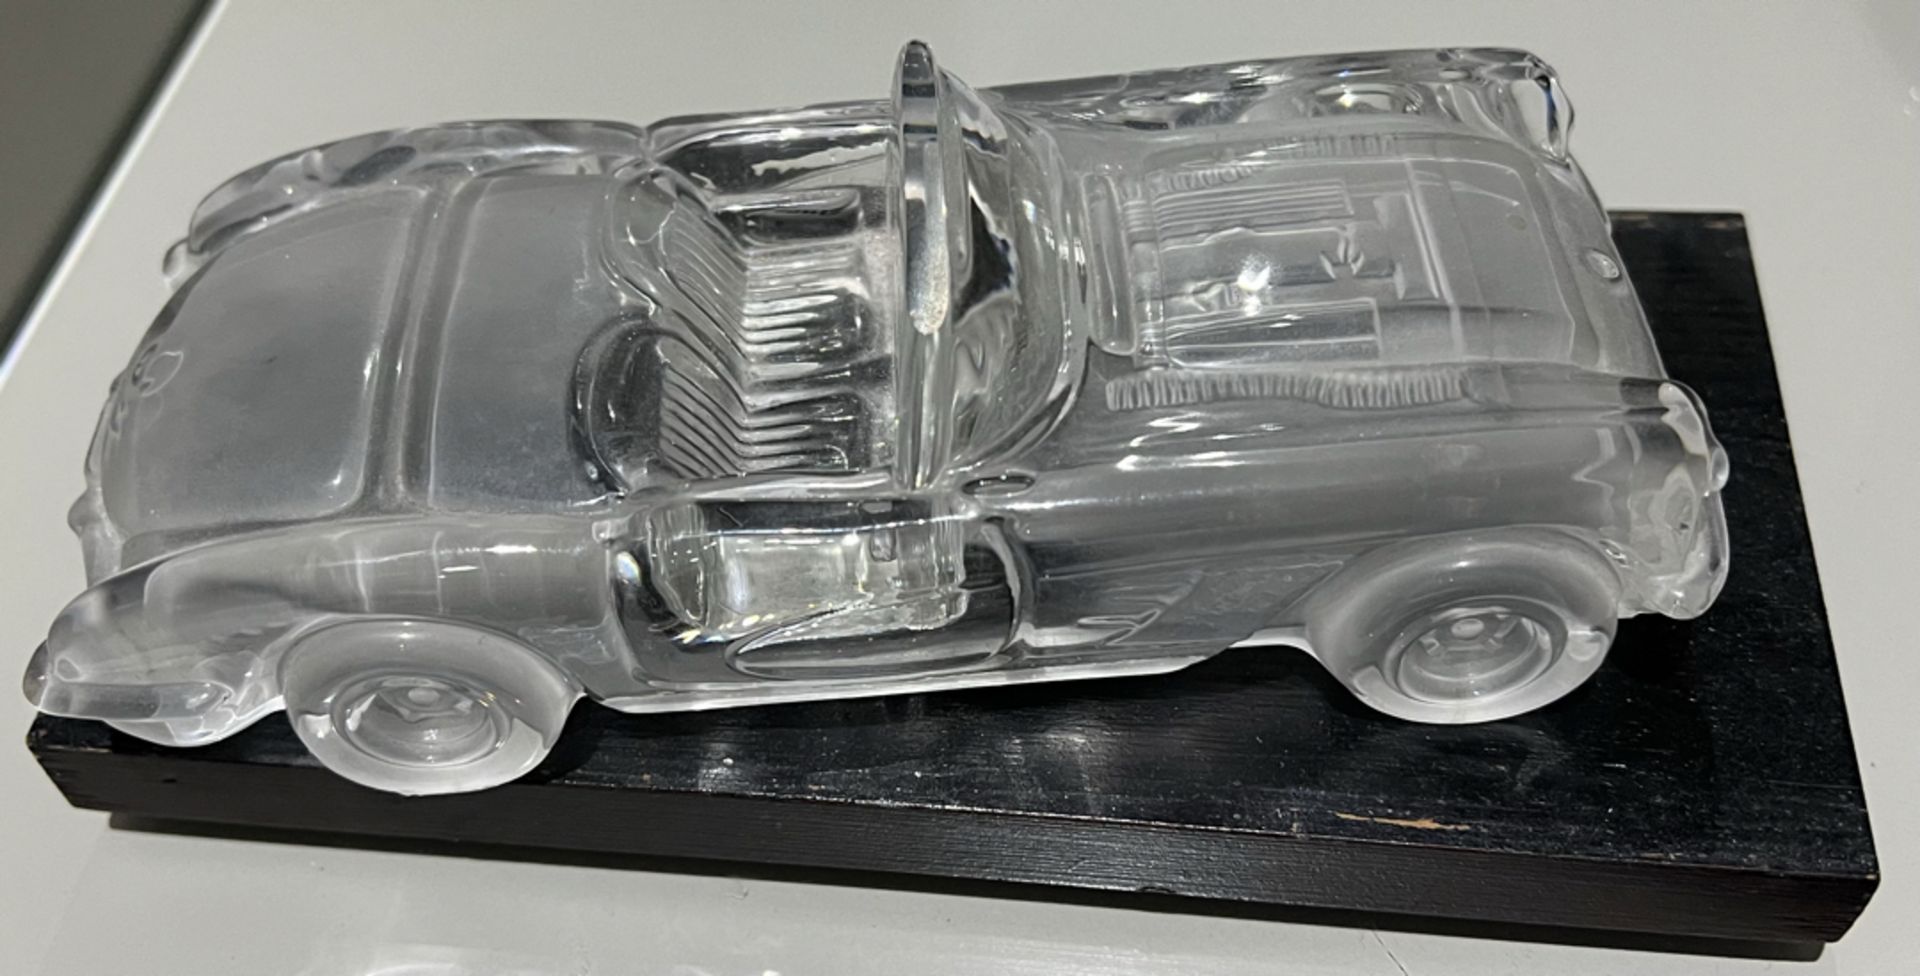 Hofbauer 1959 Corvette Glass Crystal Car Display with Base - Image 2 of 3